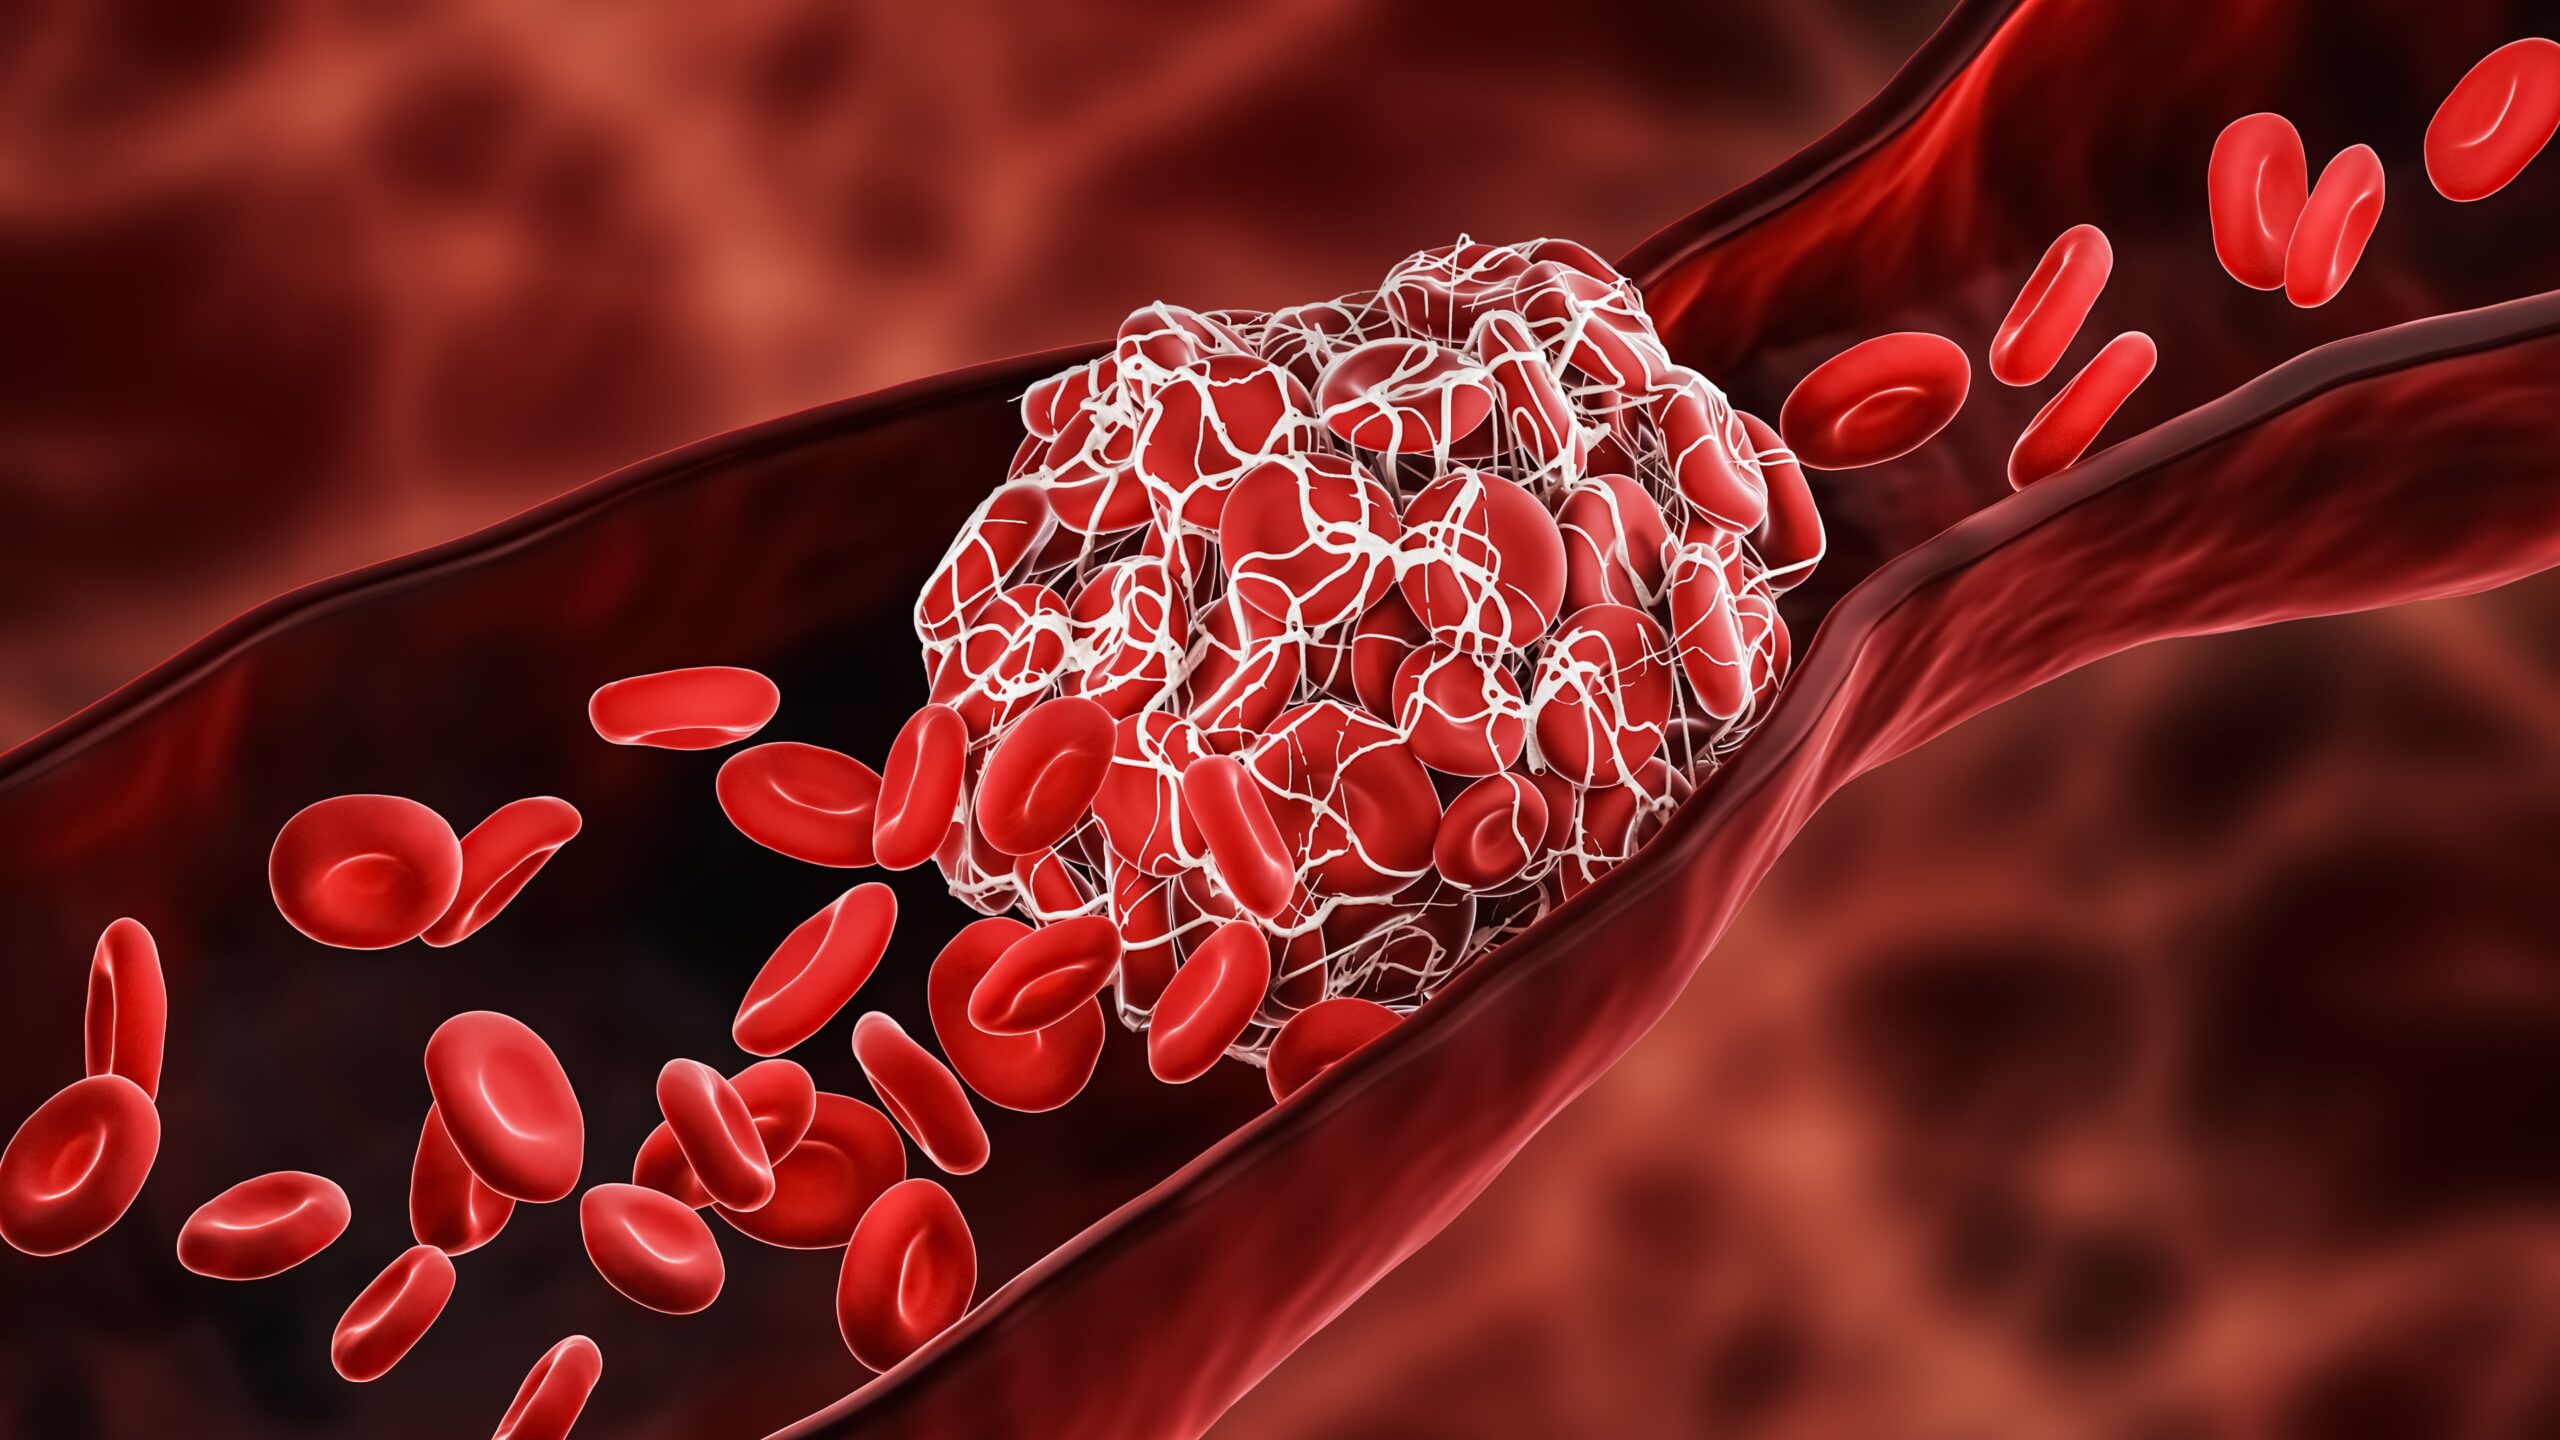 Nationwide Database Study Describes Intracardiac Thrombosis in Patients with COVID-19